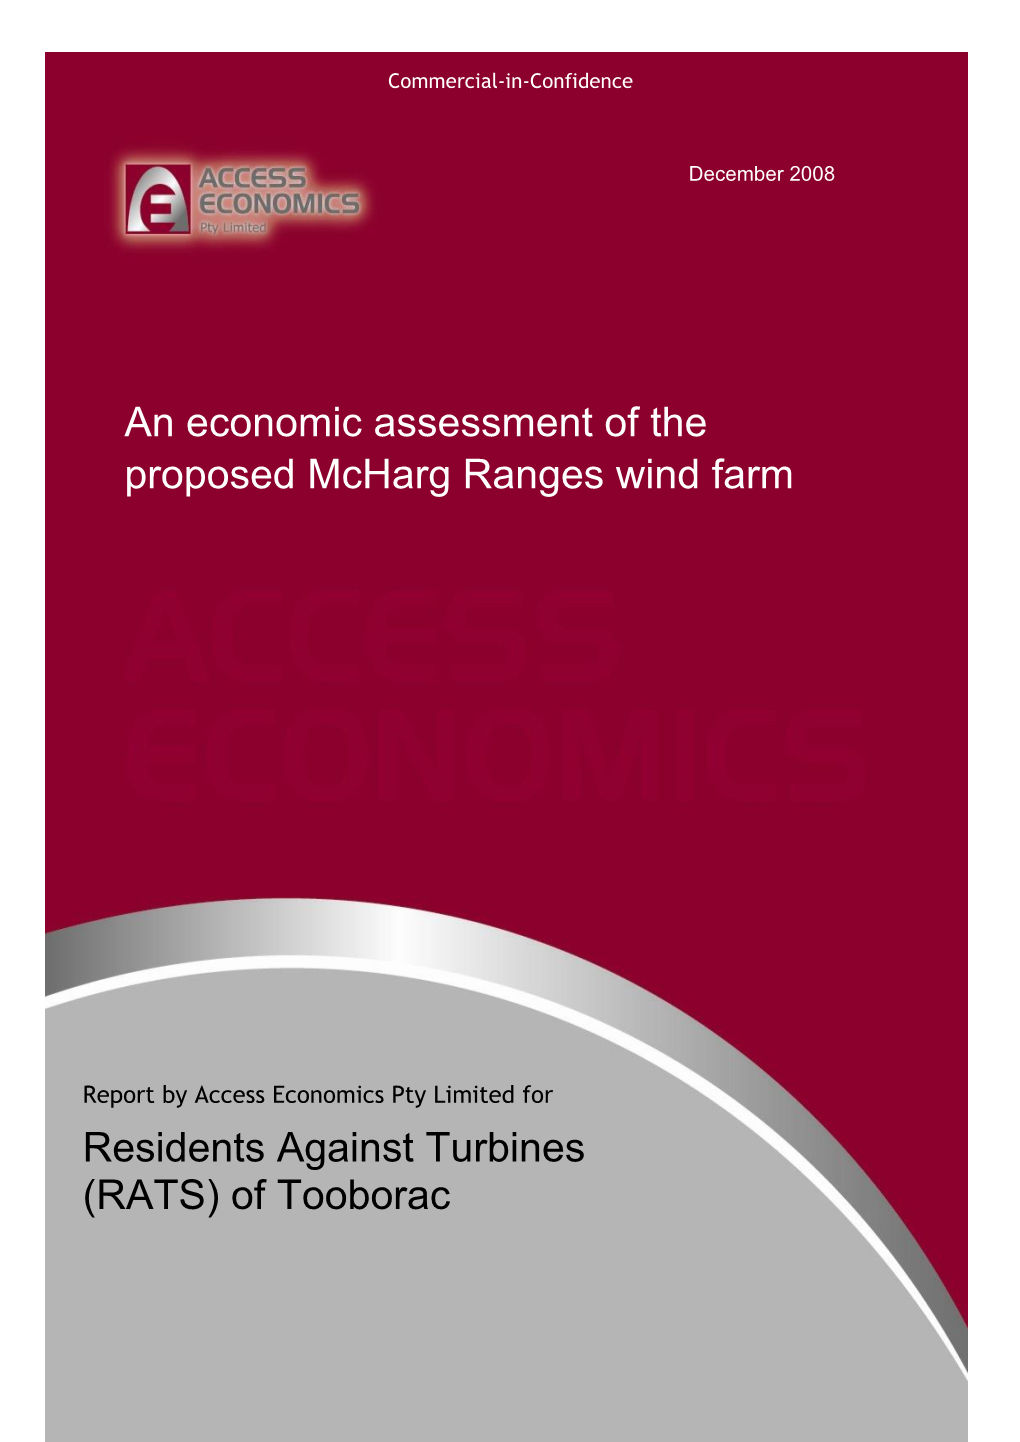 An Economic Assessment of the Proposed Mcharg Ranges Wind Farm